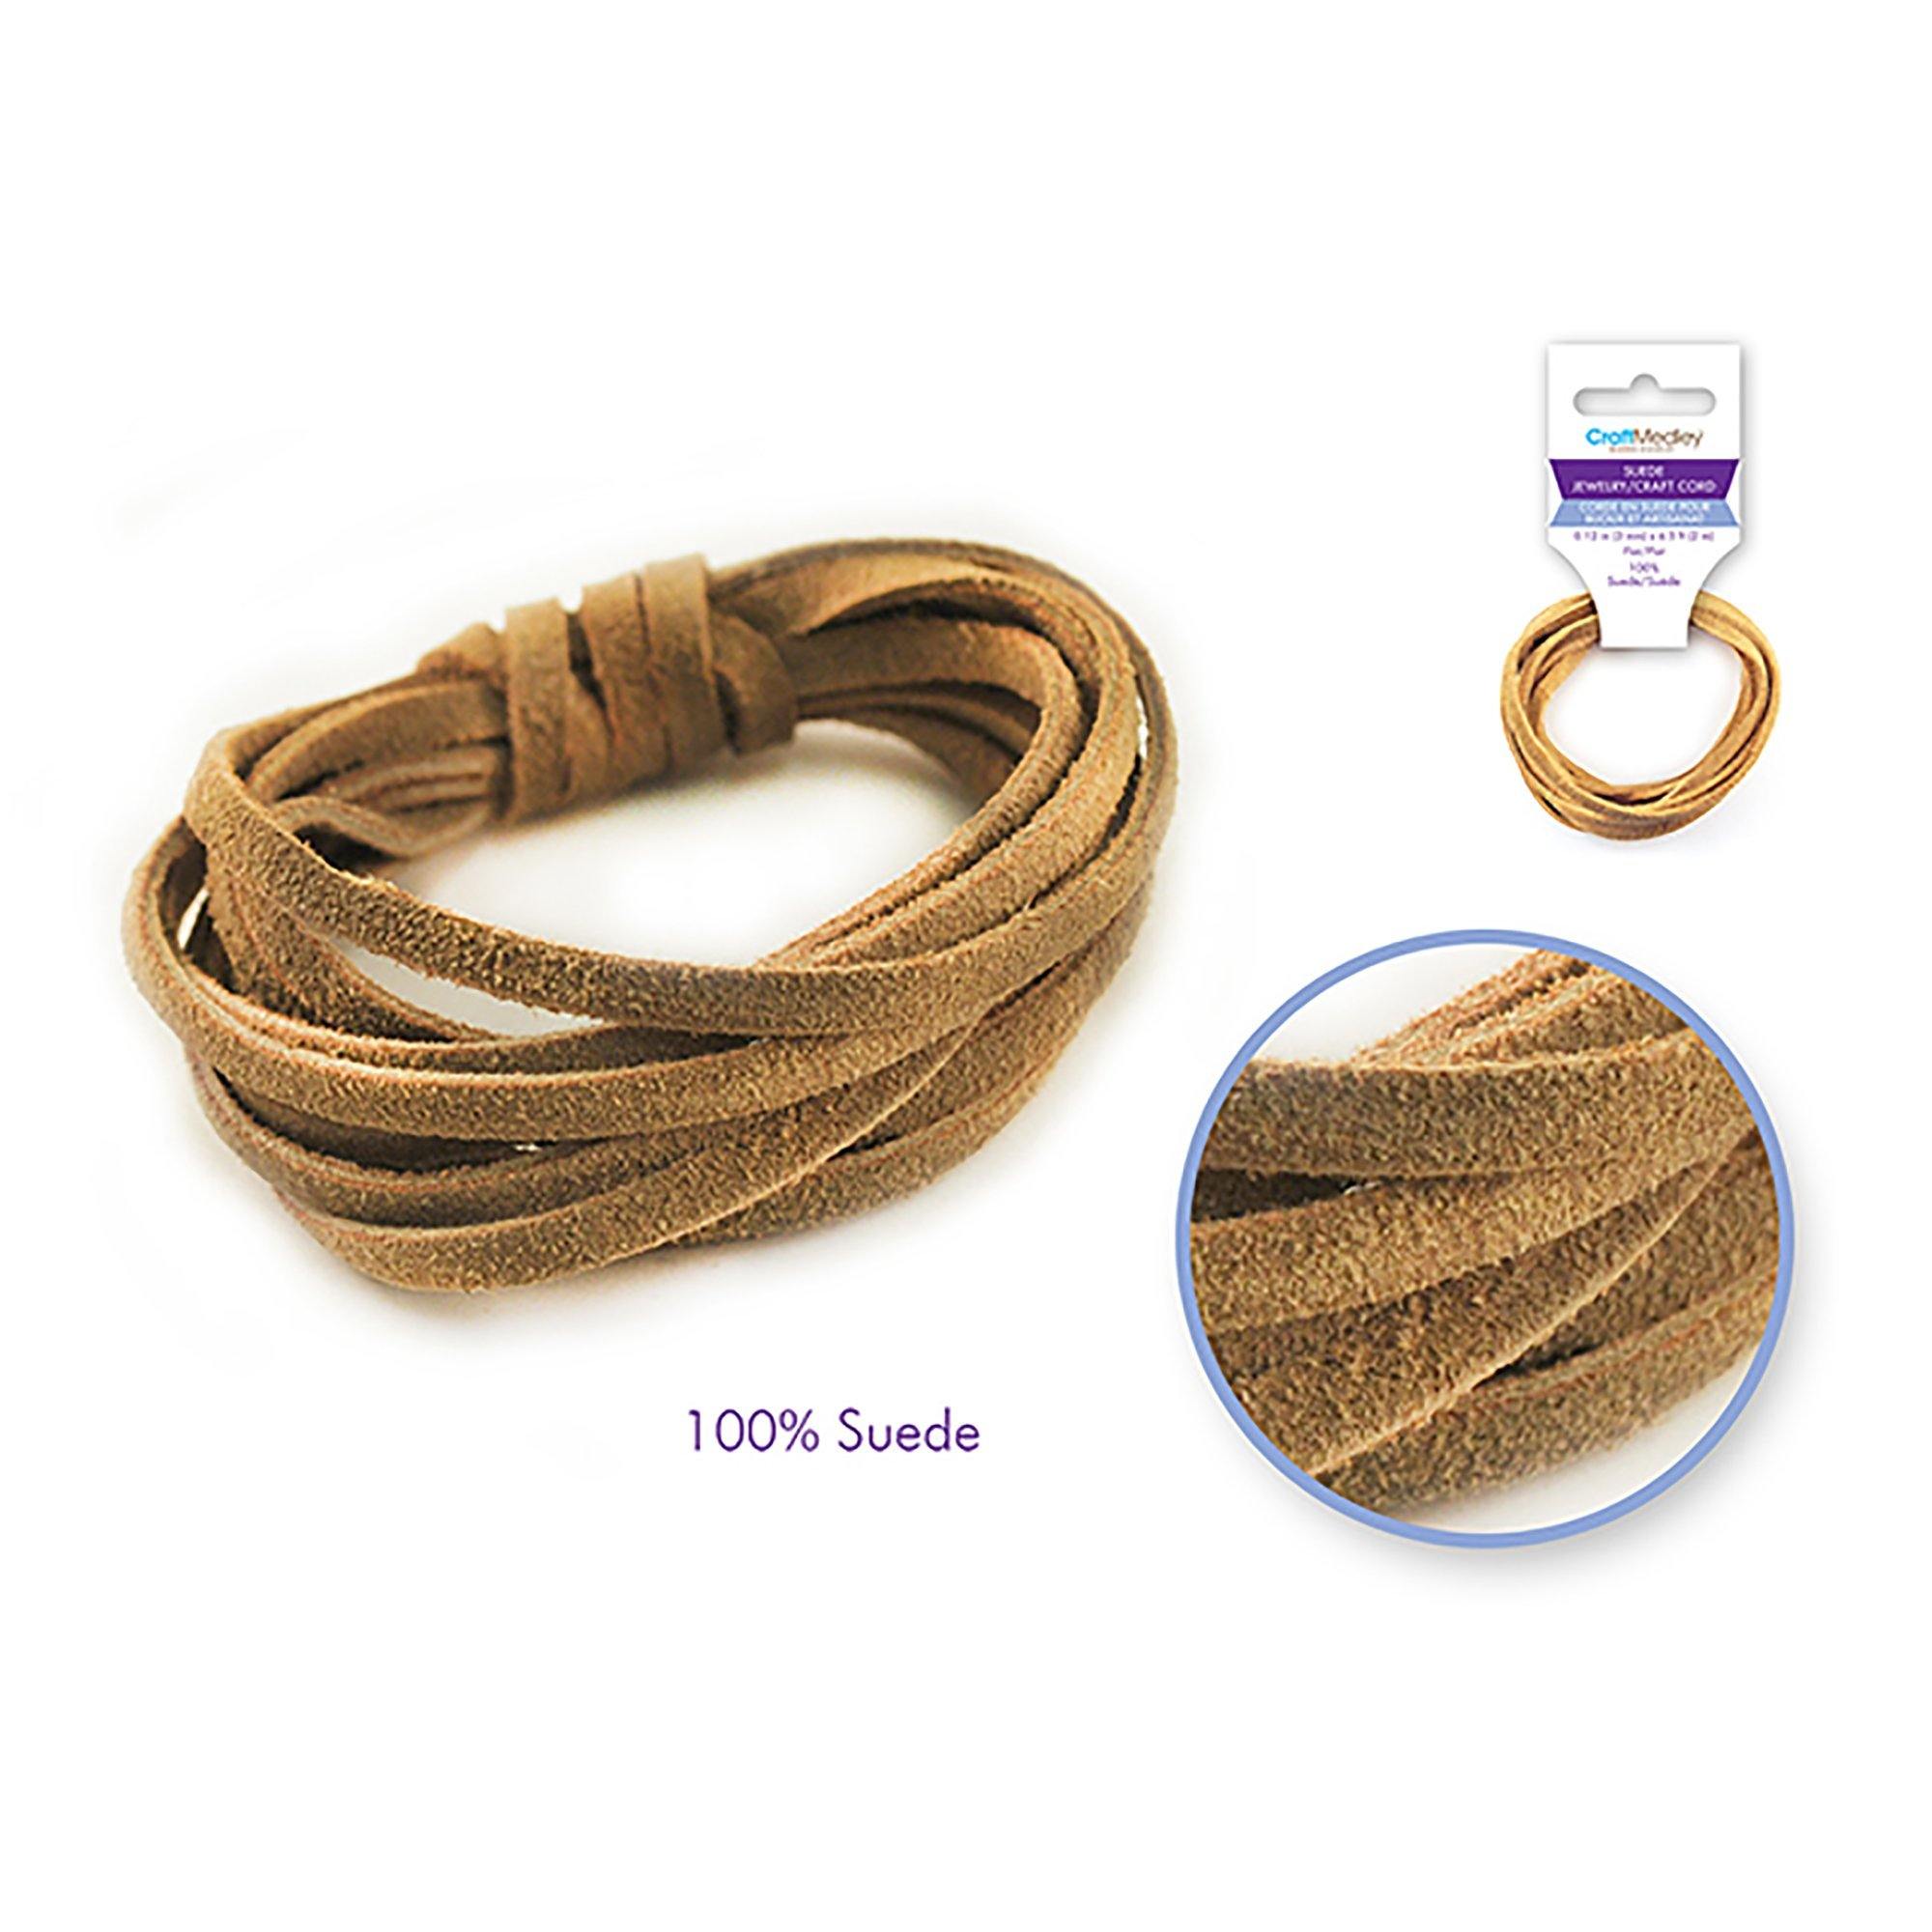 Natural Jewelry/Craft Cord: 100% Suede 3Mm Flat X2M - Dollar Max Dépôt